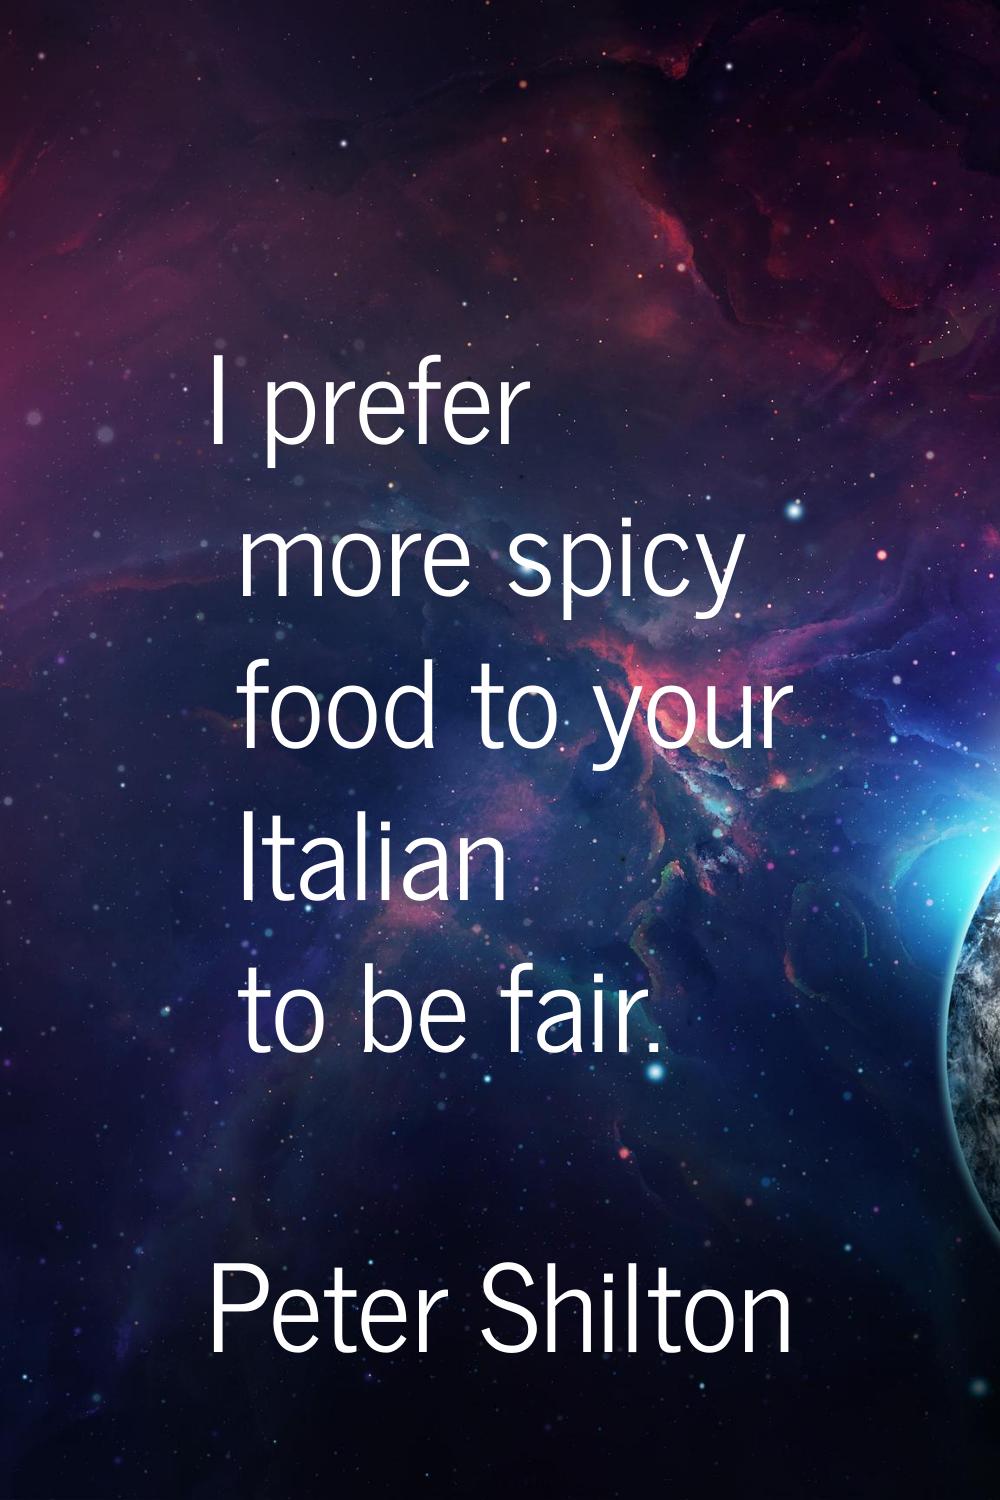 I prefer more spicy food to your Italian to be fair.